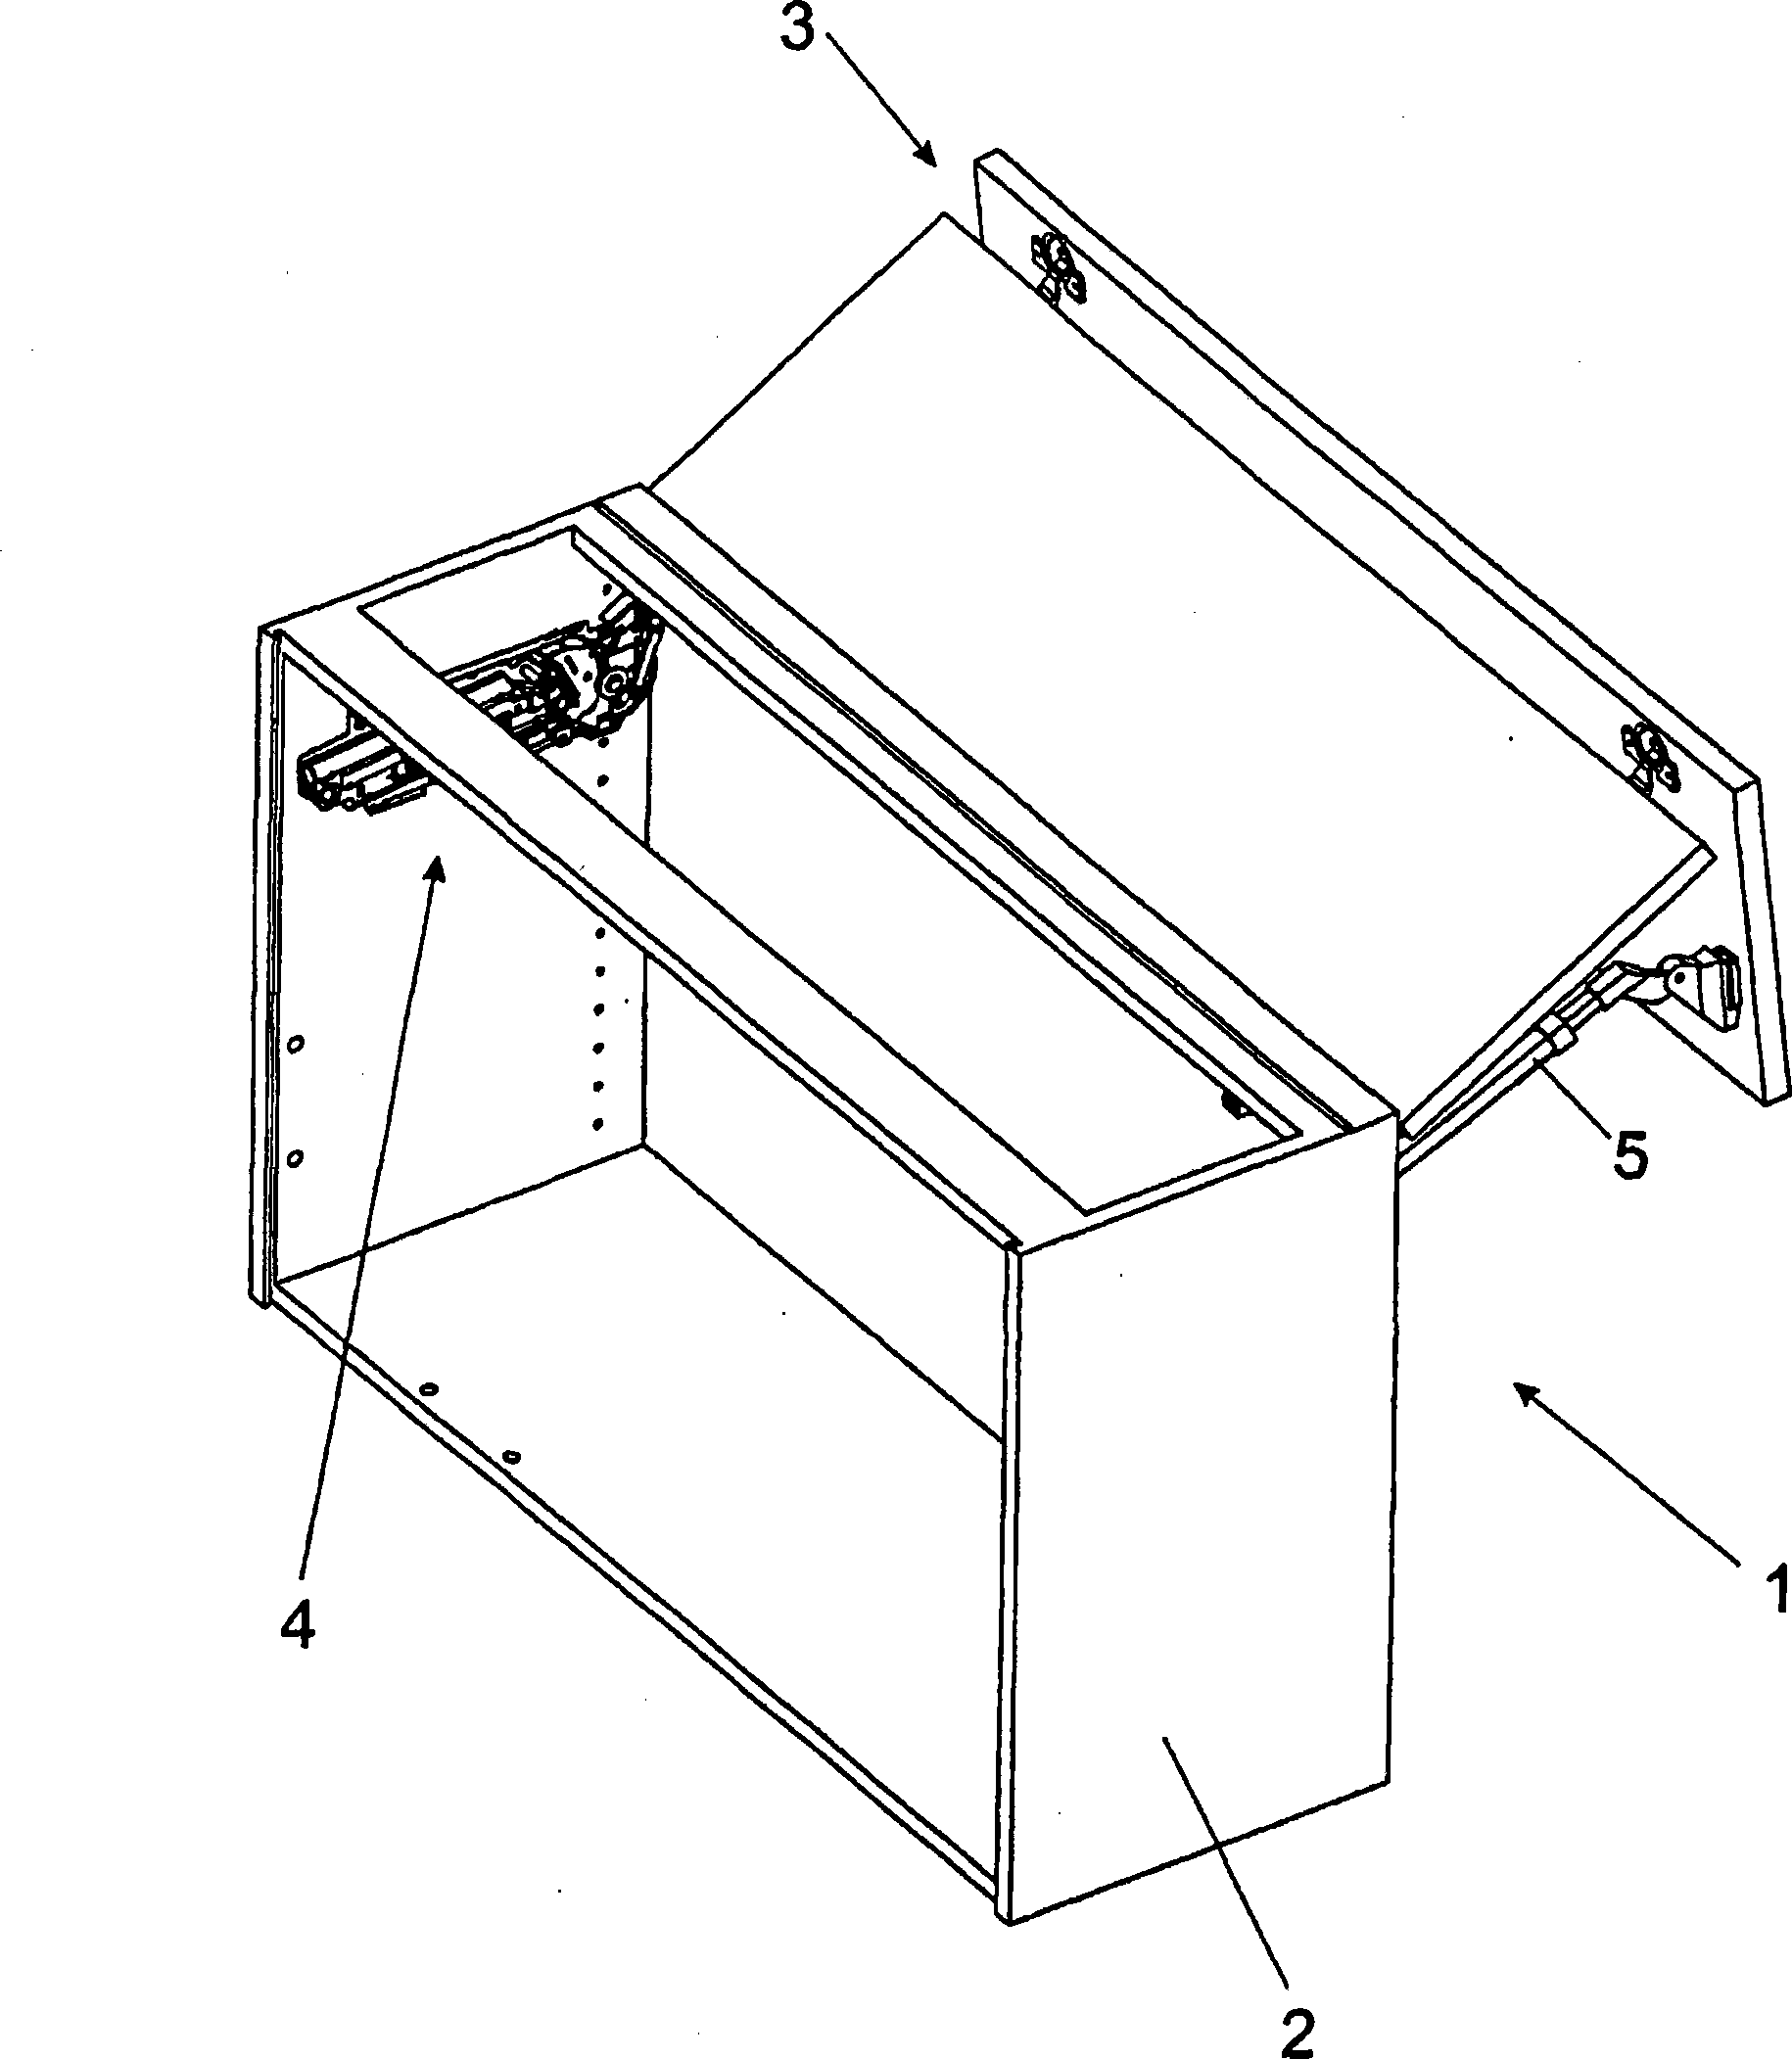 Actuating drive for a furniture flap having a mounting securing mechanism for the empty actuating arm